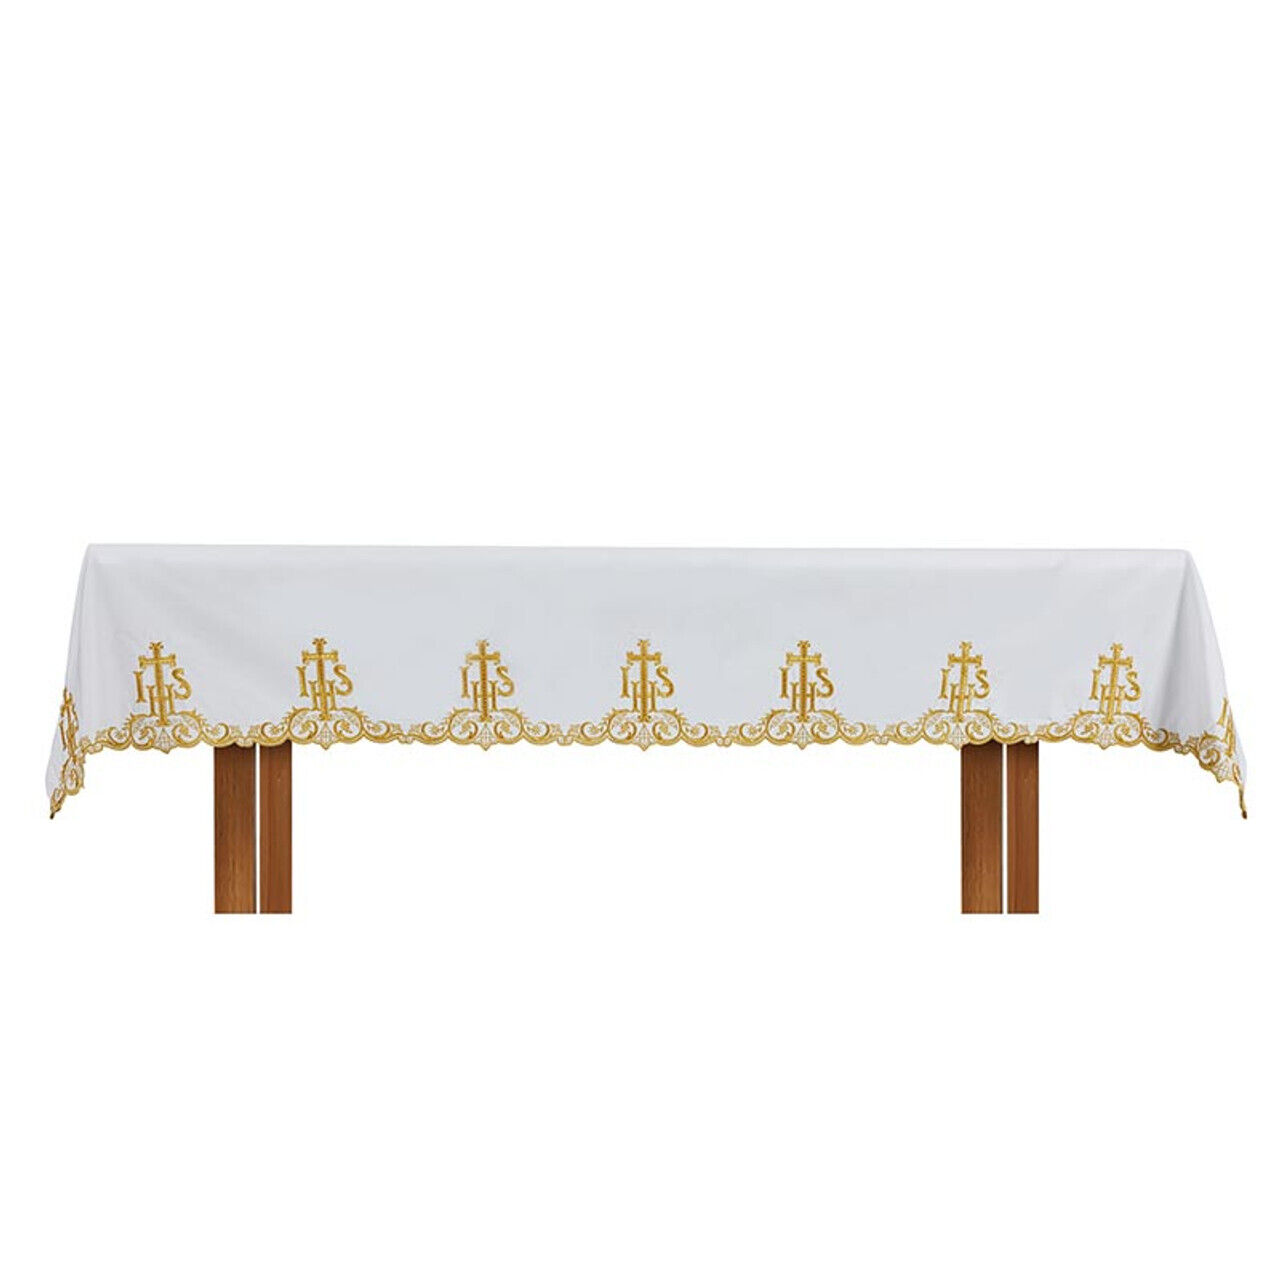 IHS Altar Frontal Church Supplies Vestment 96 Inch x 7 Inch Embroidered Design